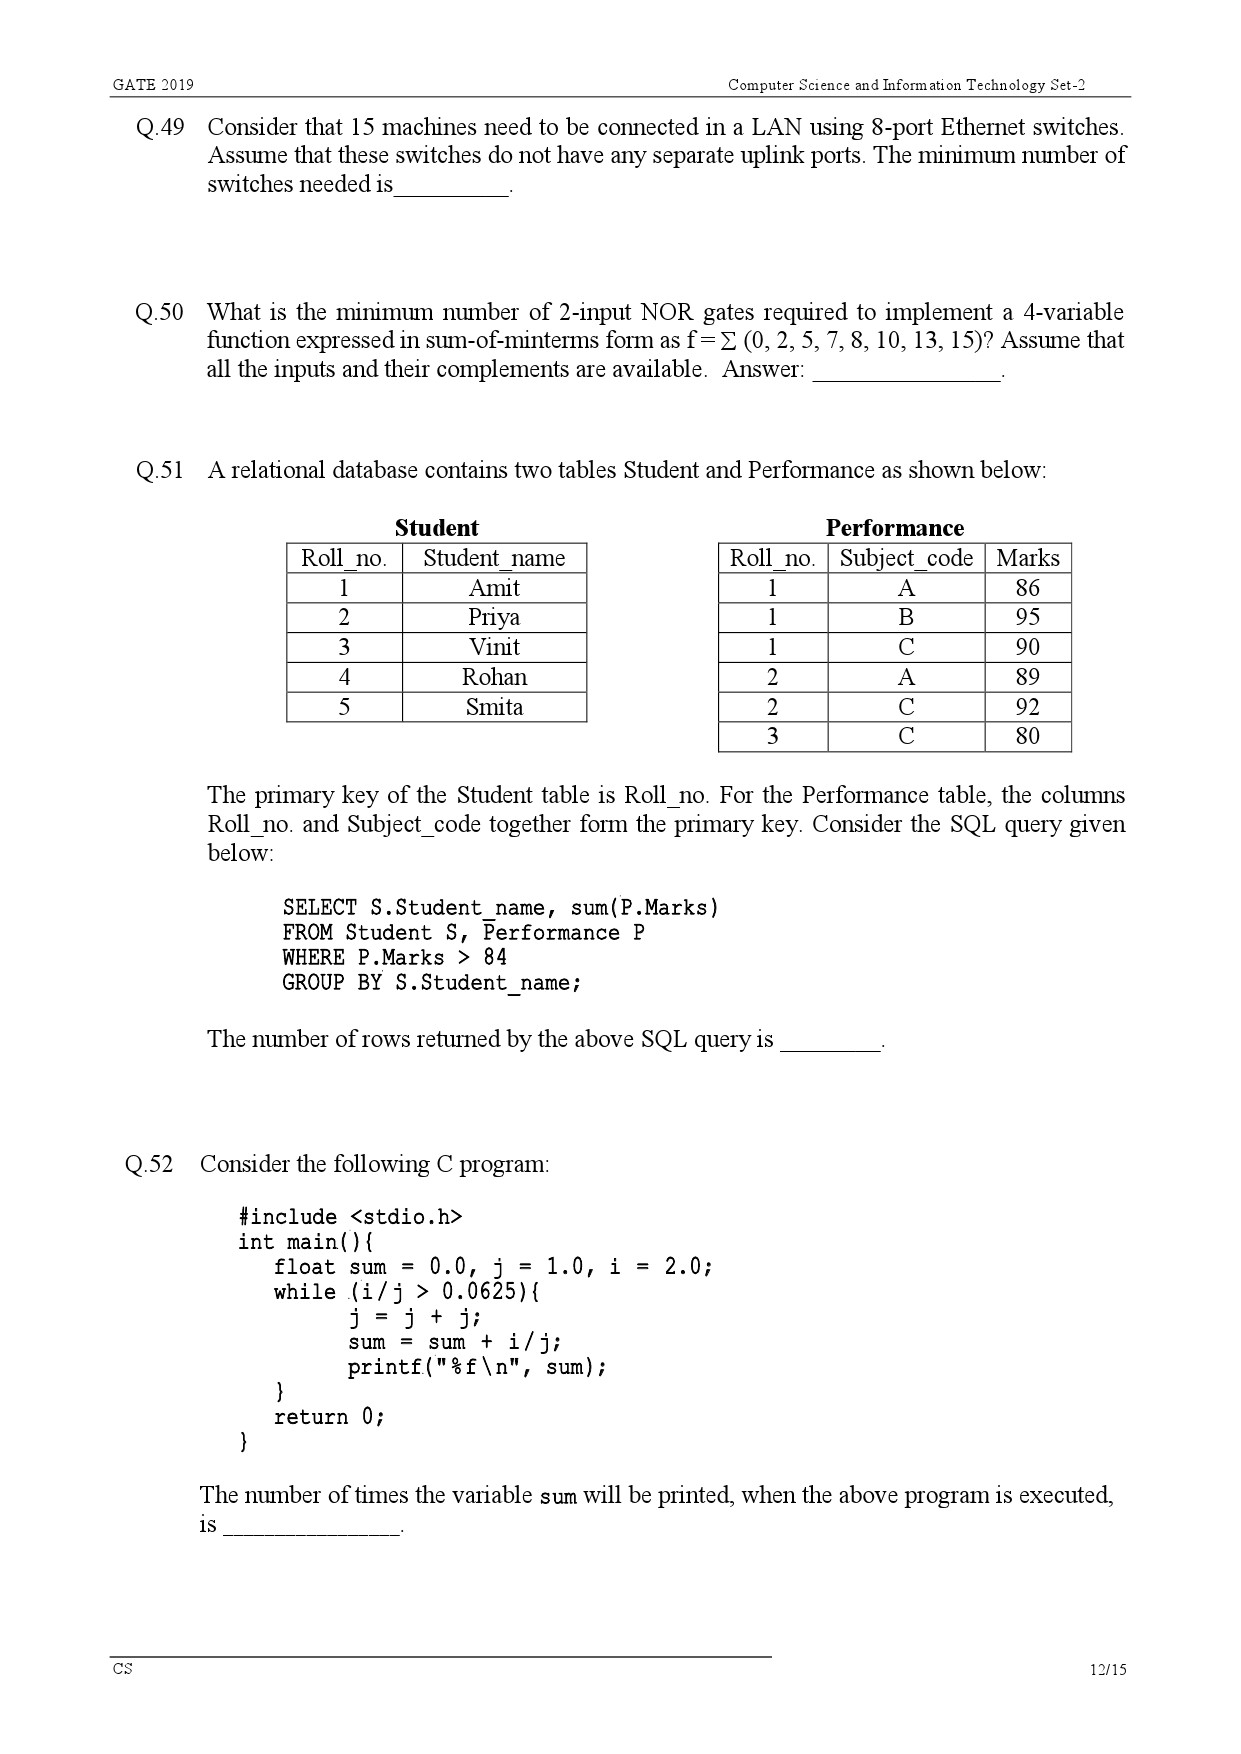 GATE Exam Question Paper 2019 Computer Science and Information Technology 15